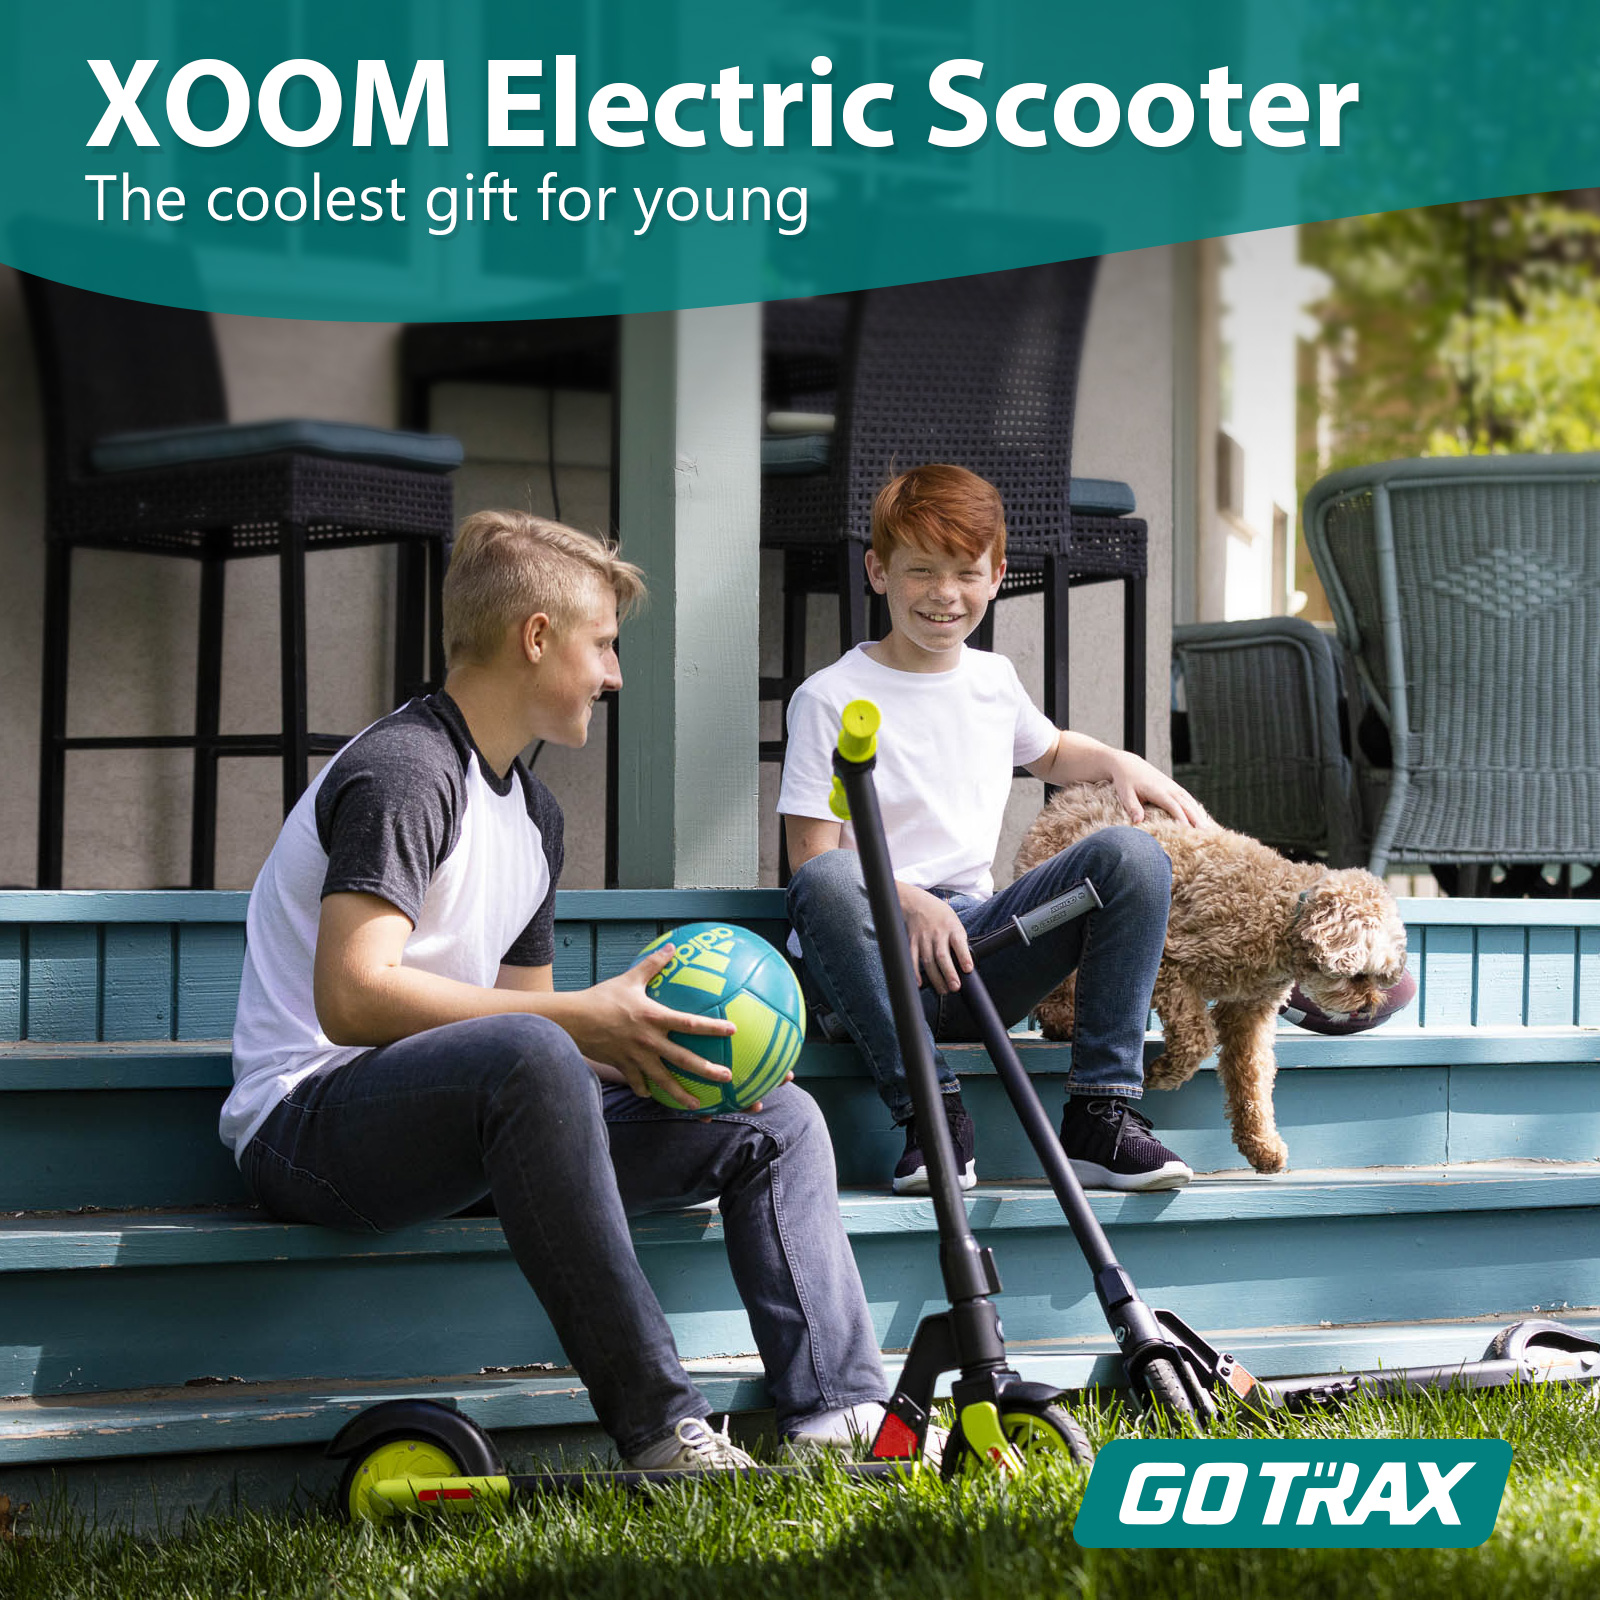 Gotrax GKS Electric Scooter for Kid Ages 6-12, 6" Wheels Lightweight Electric Kick Scooter for Kid, Blue - image 4 of 11